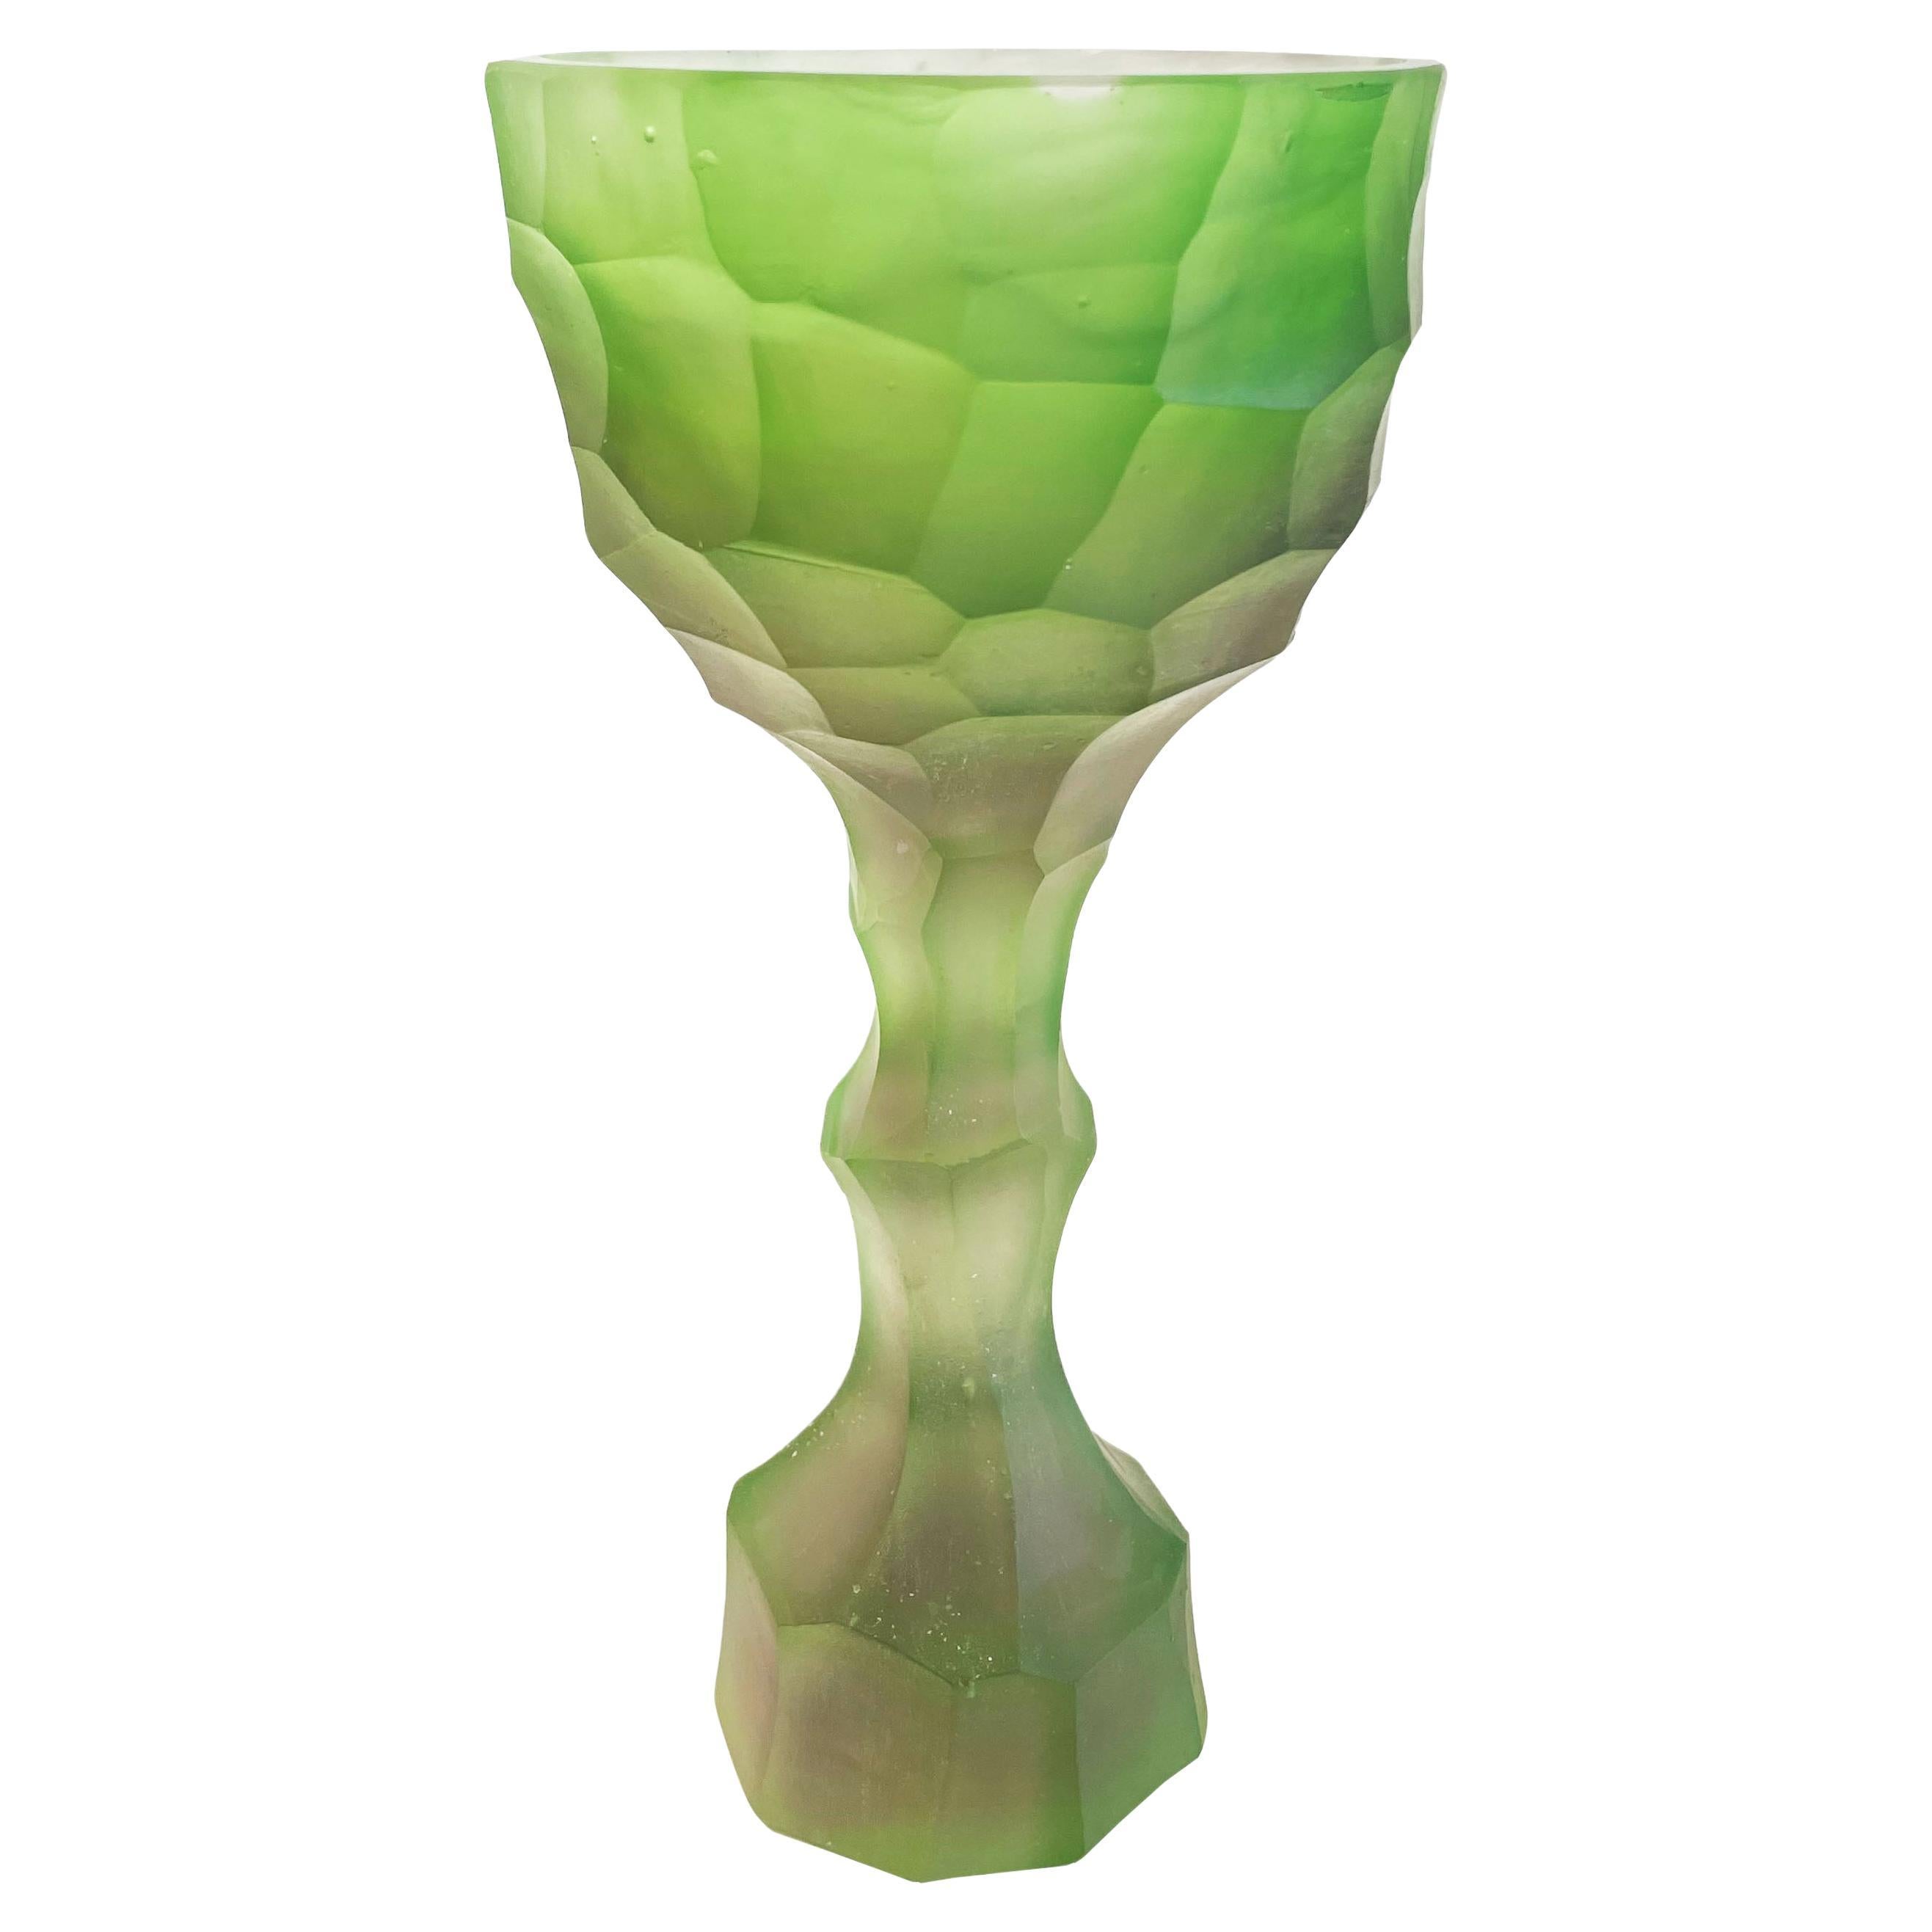 Contemporary and Green Glass Casted Stone Age Goblets by Alissa Volchkova